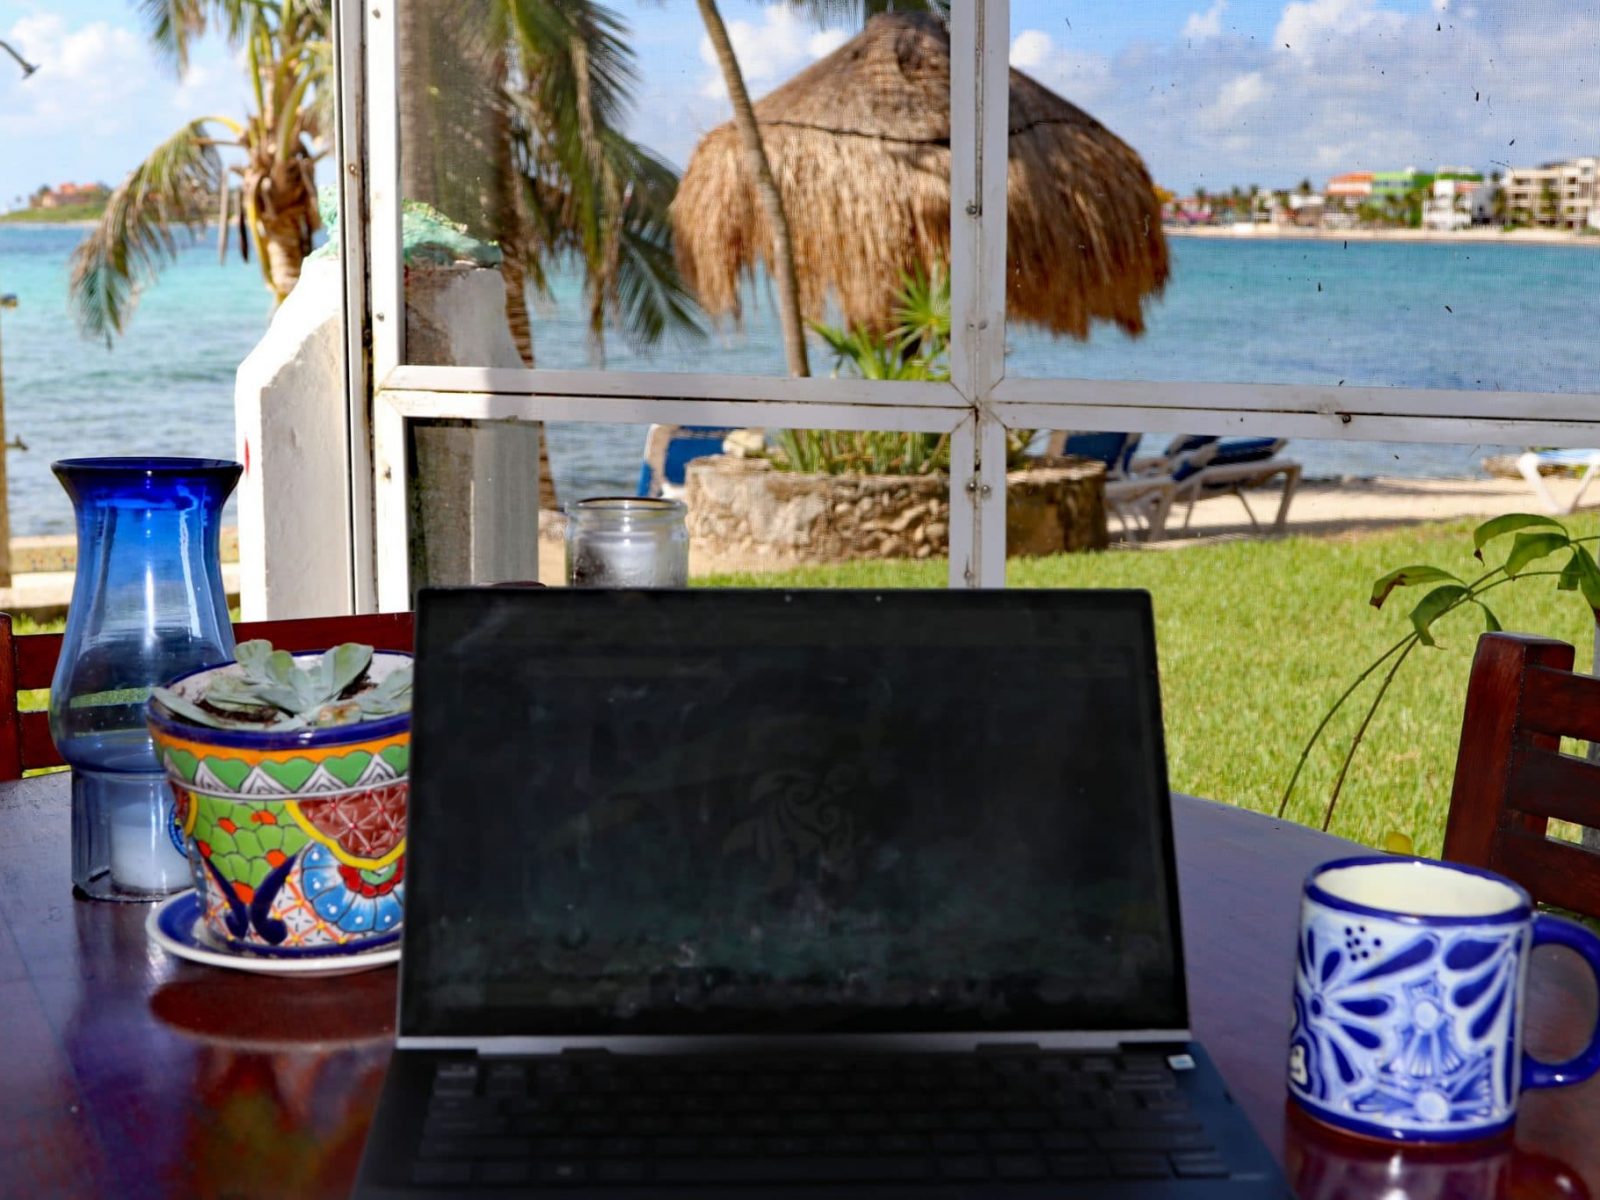 LauritaMar, La Sirena 2: The Screened Beach Porch's Table Makes a Great Work Area